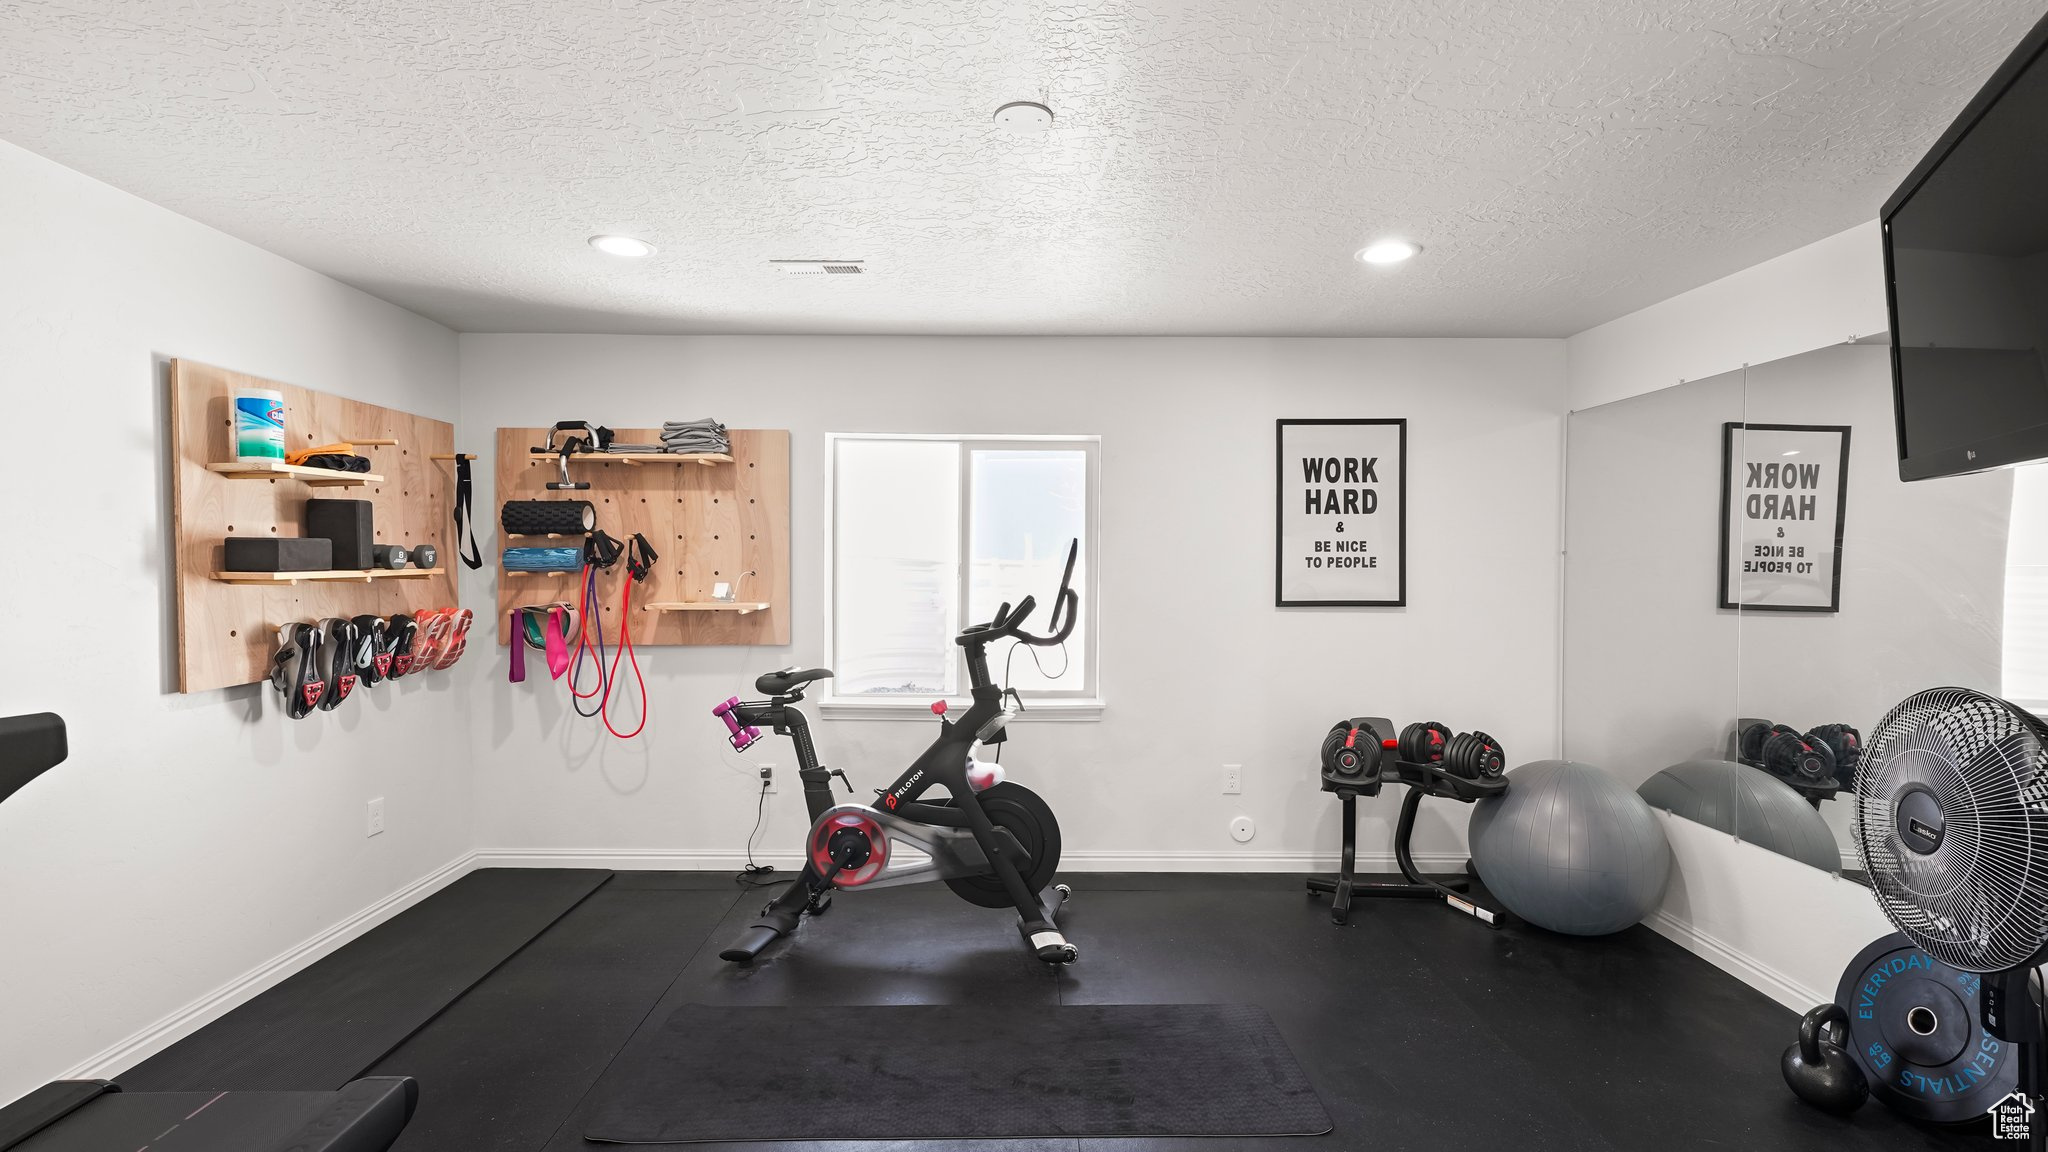 Workout area featuring a textured ceiling